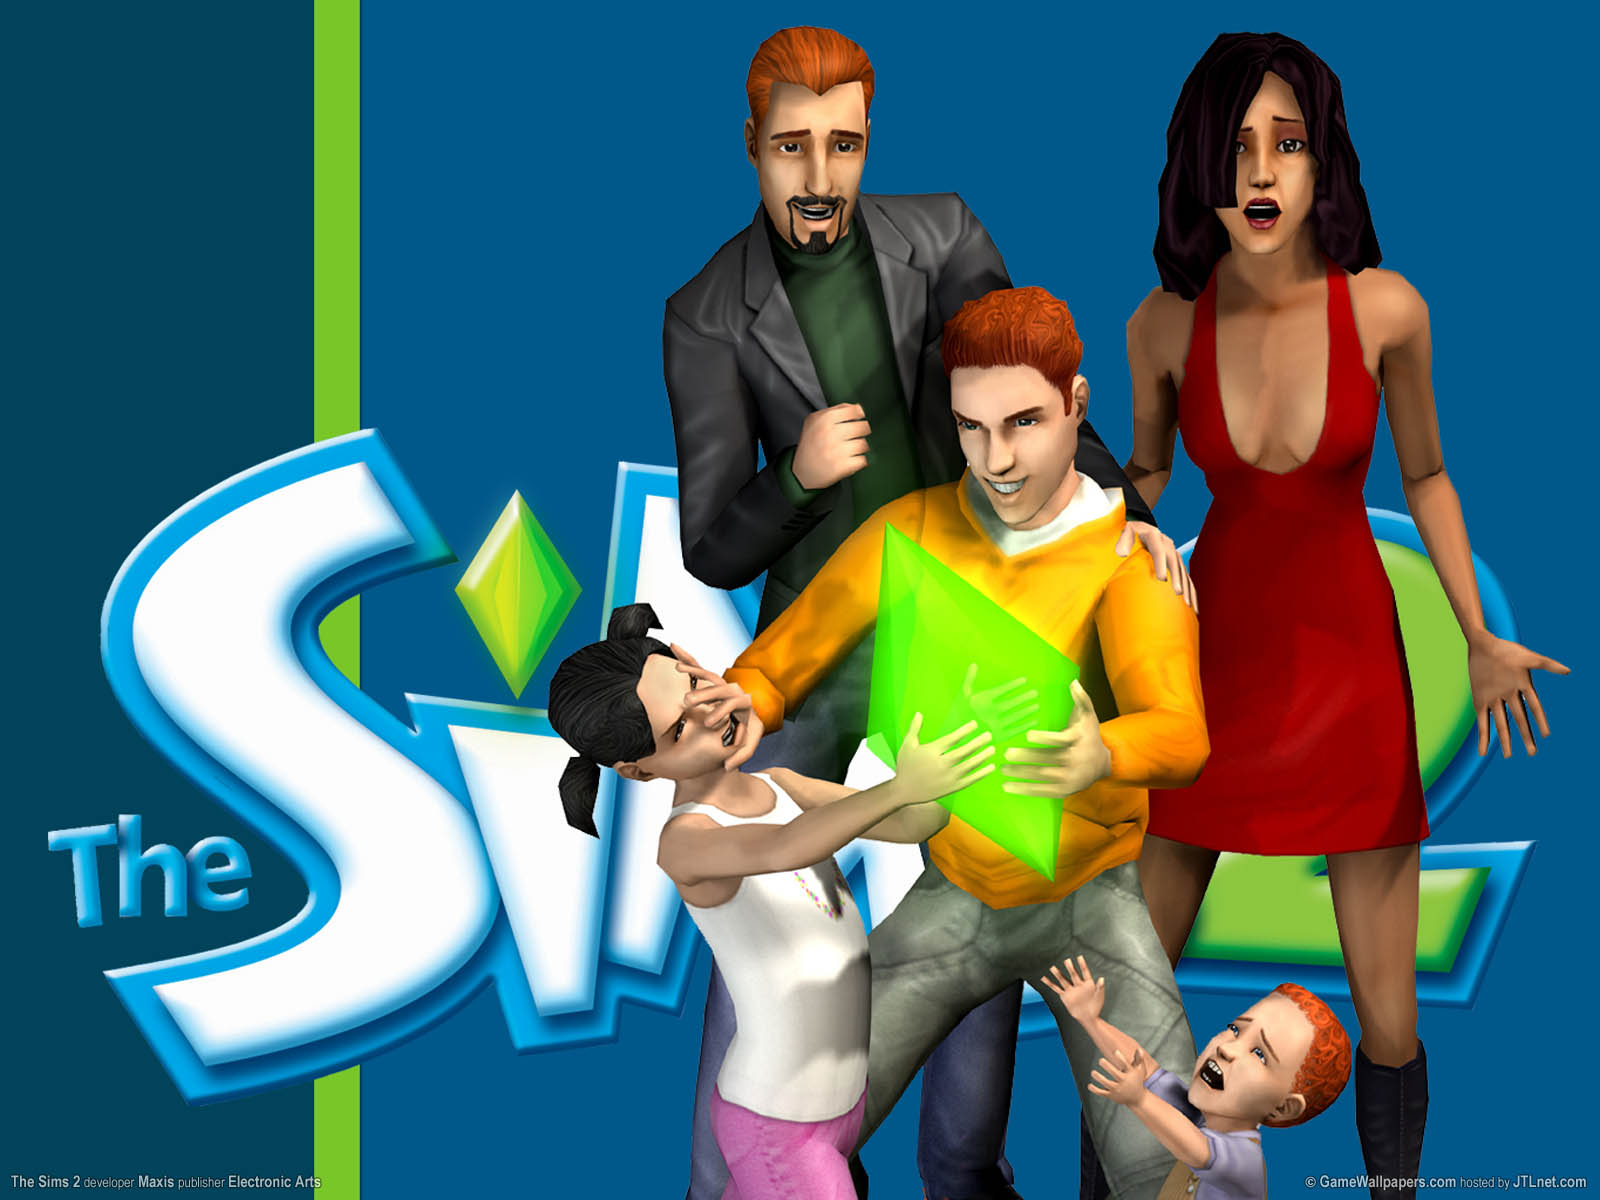 The Sims 2 achtergrond 02 1600x1200